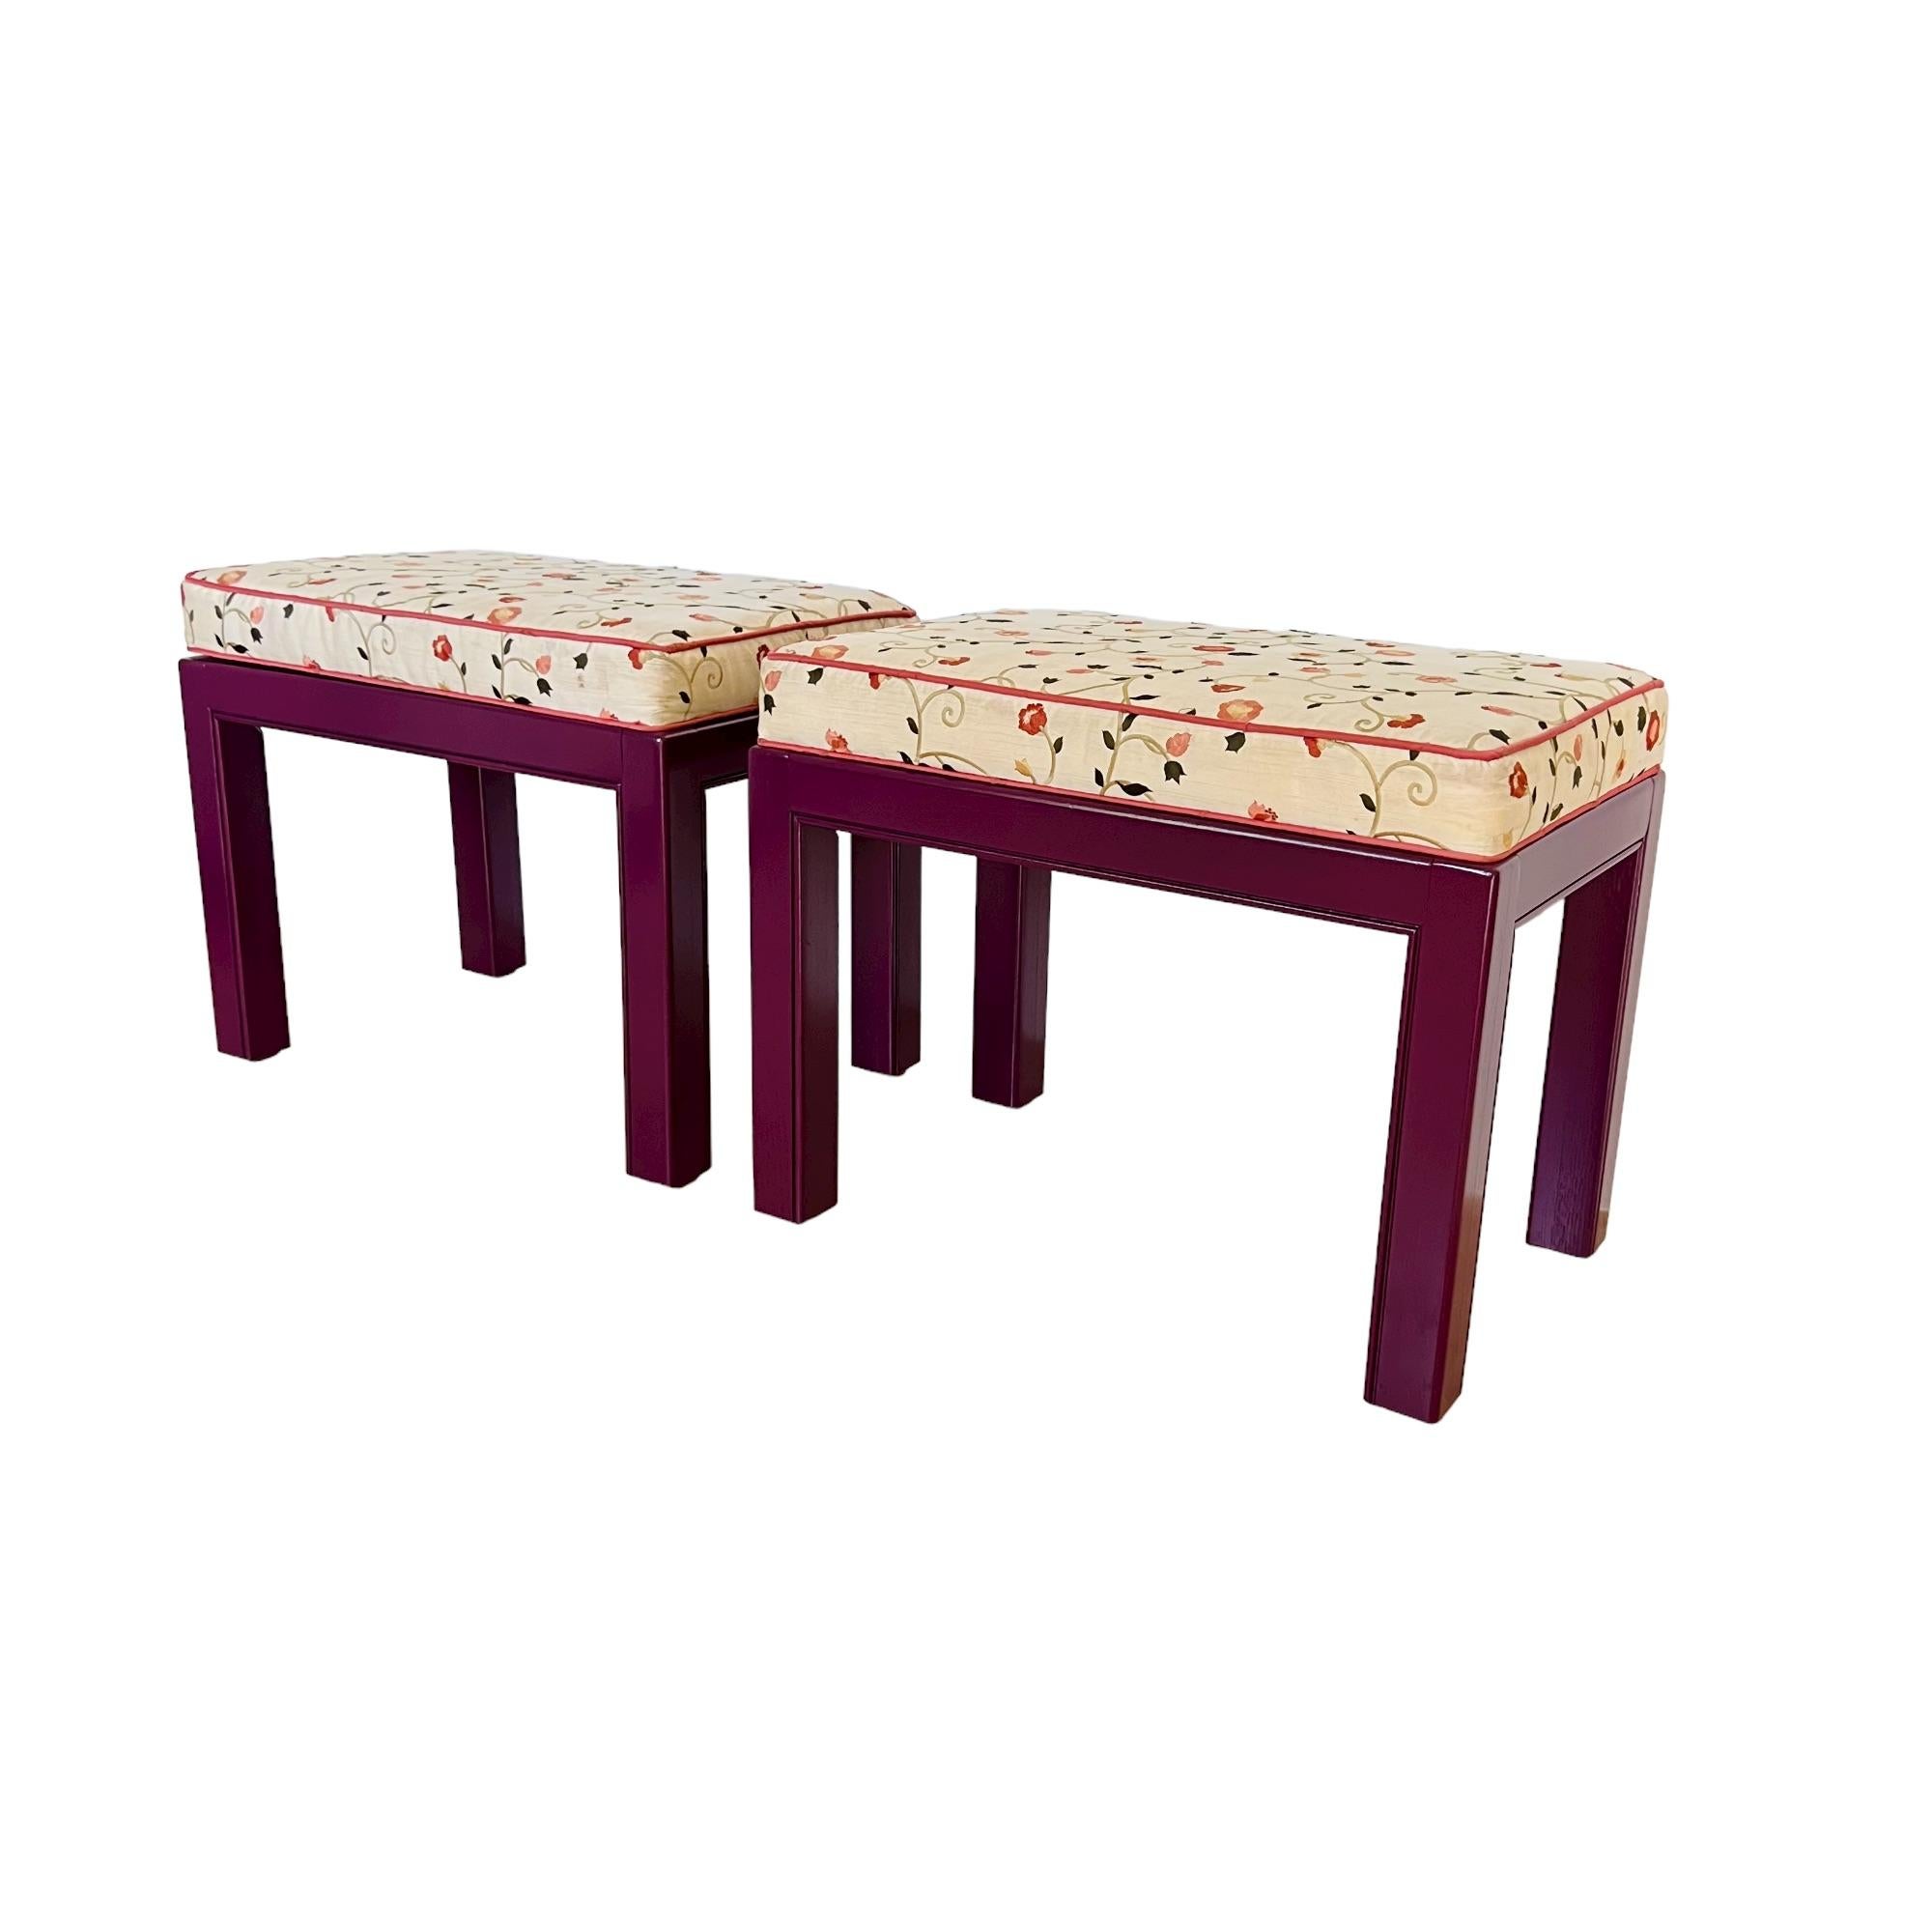 A late 20th century pair of Drexel Heritage Chippendale style custom upholstered and painted benches or ottomans. These petite eclectic seats/stools features channelled wood aprons and legs updated in a semi-gloss aubergine (eggplant) color. The